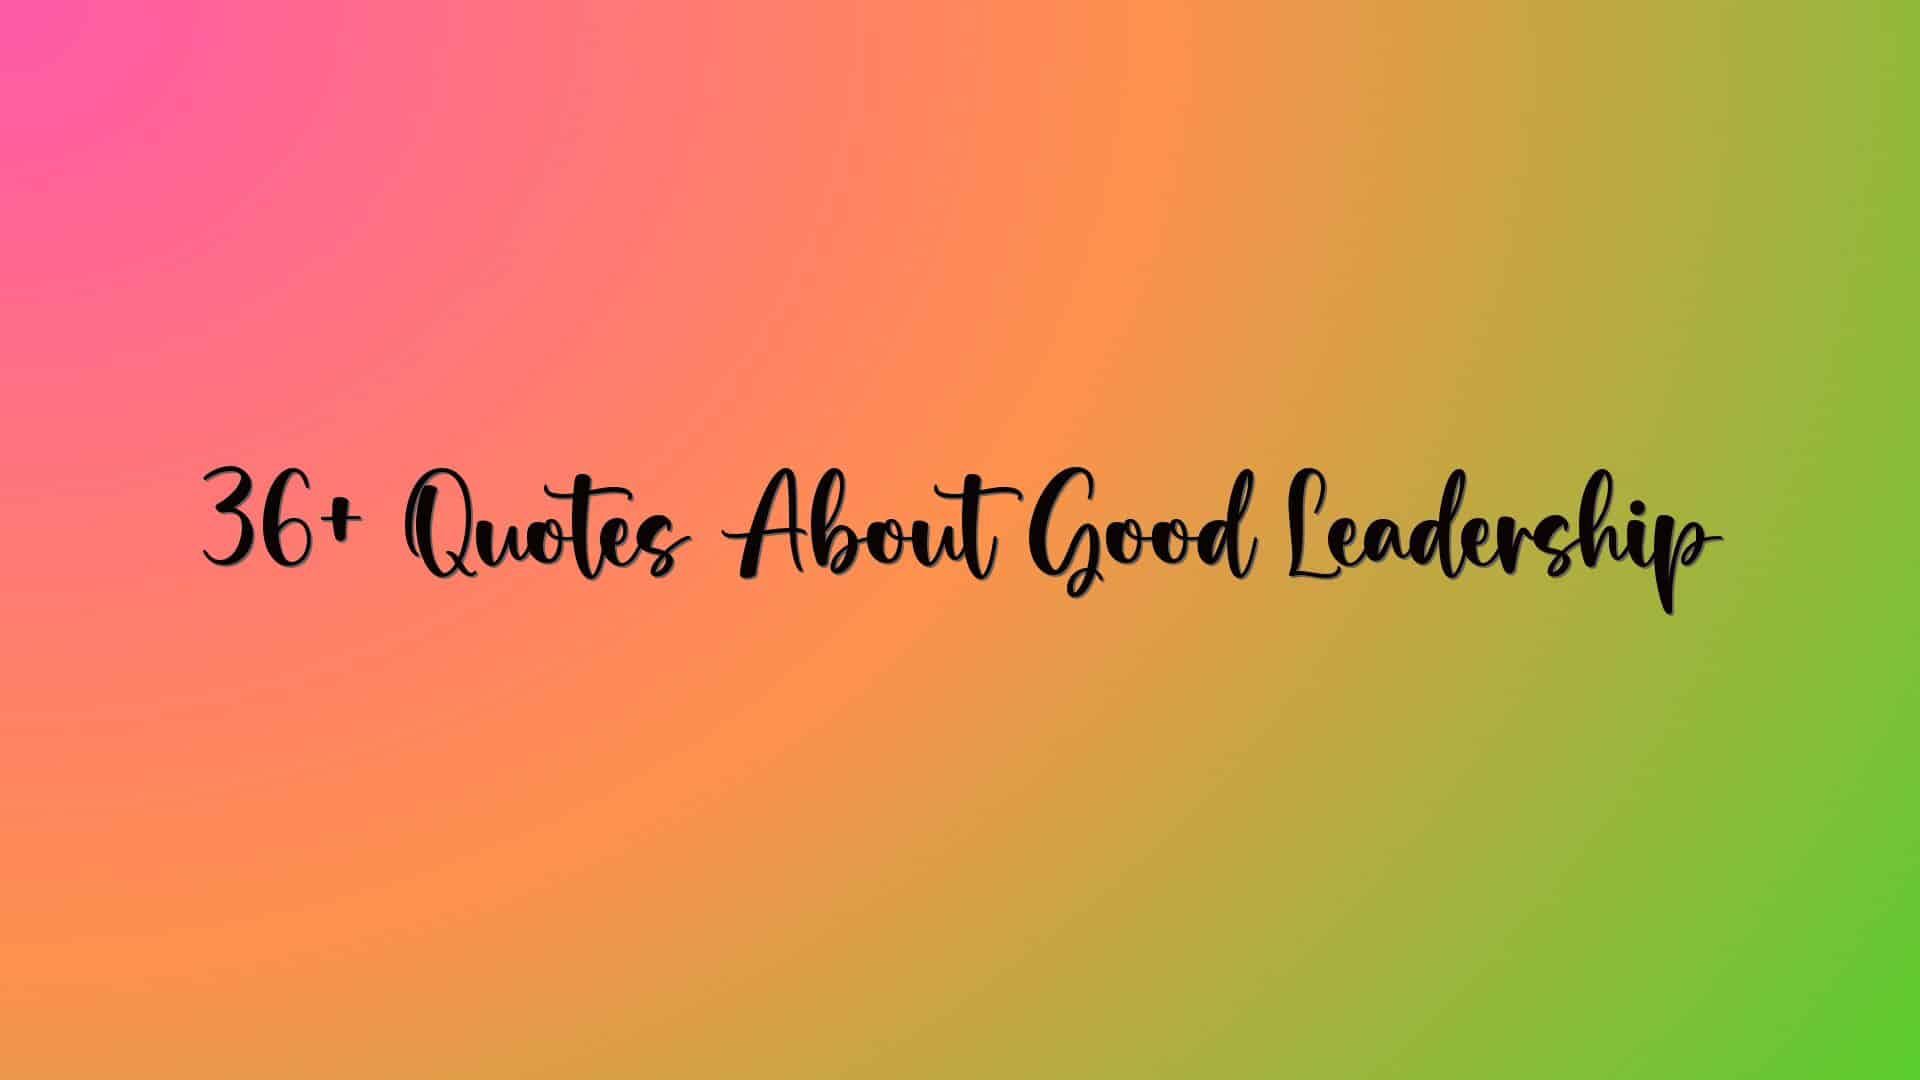 36+ Quotes About Good Leadership